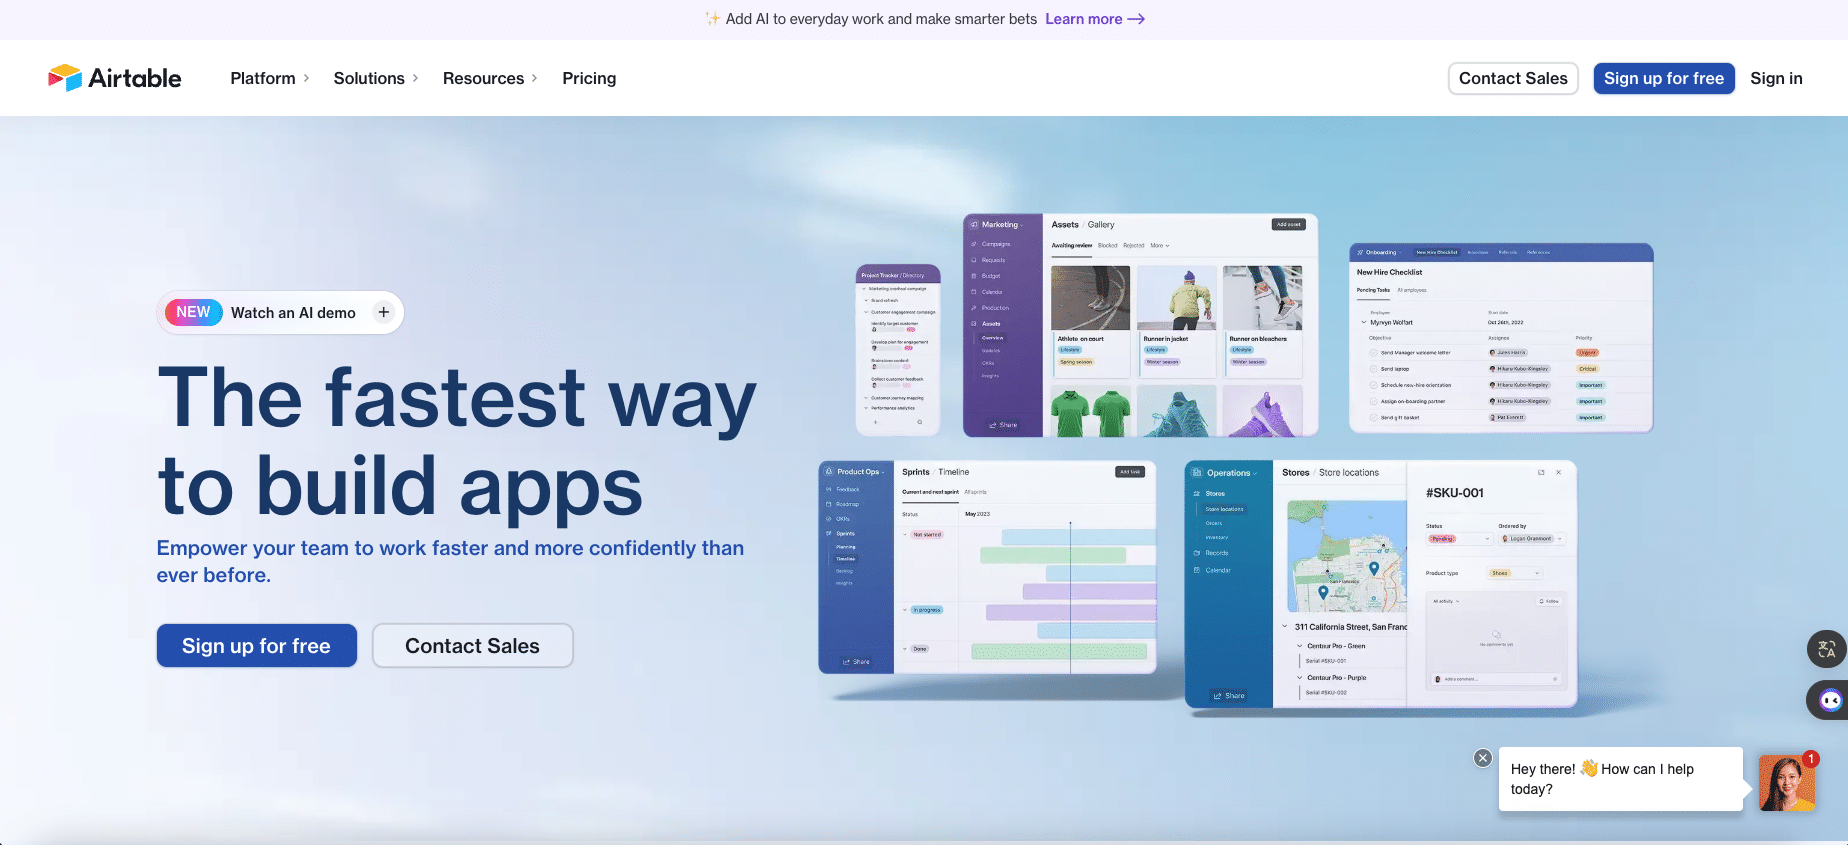 Airtable Home Page Overview